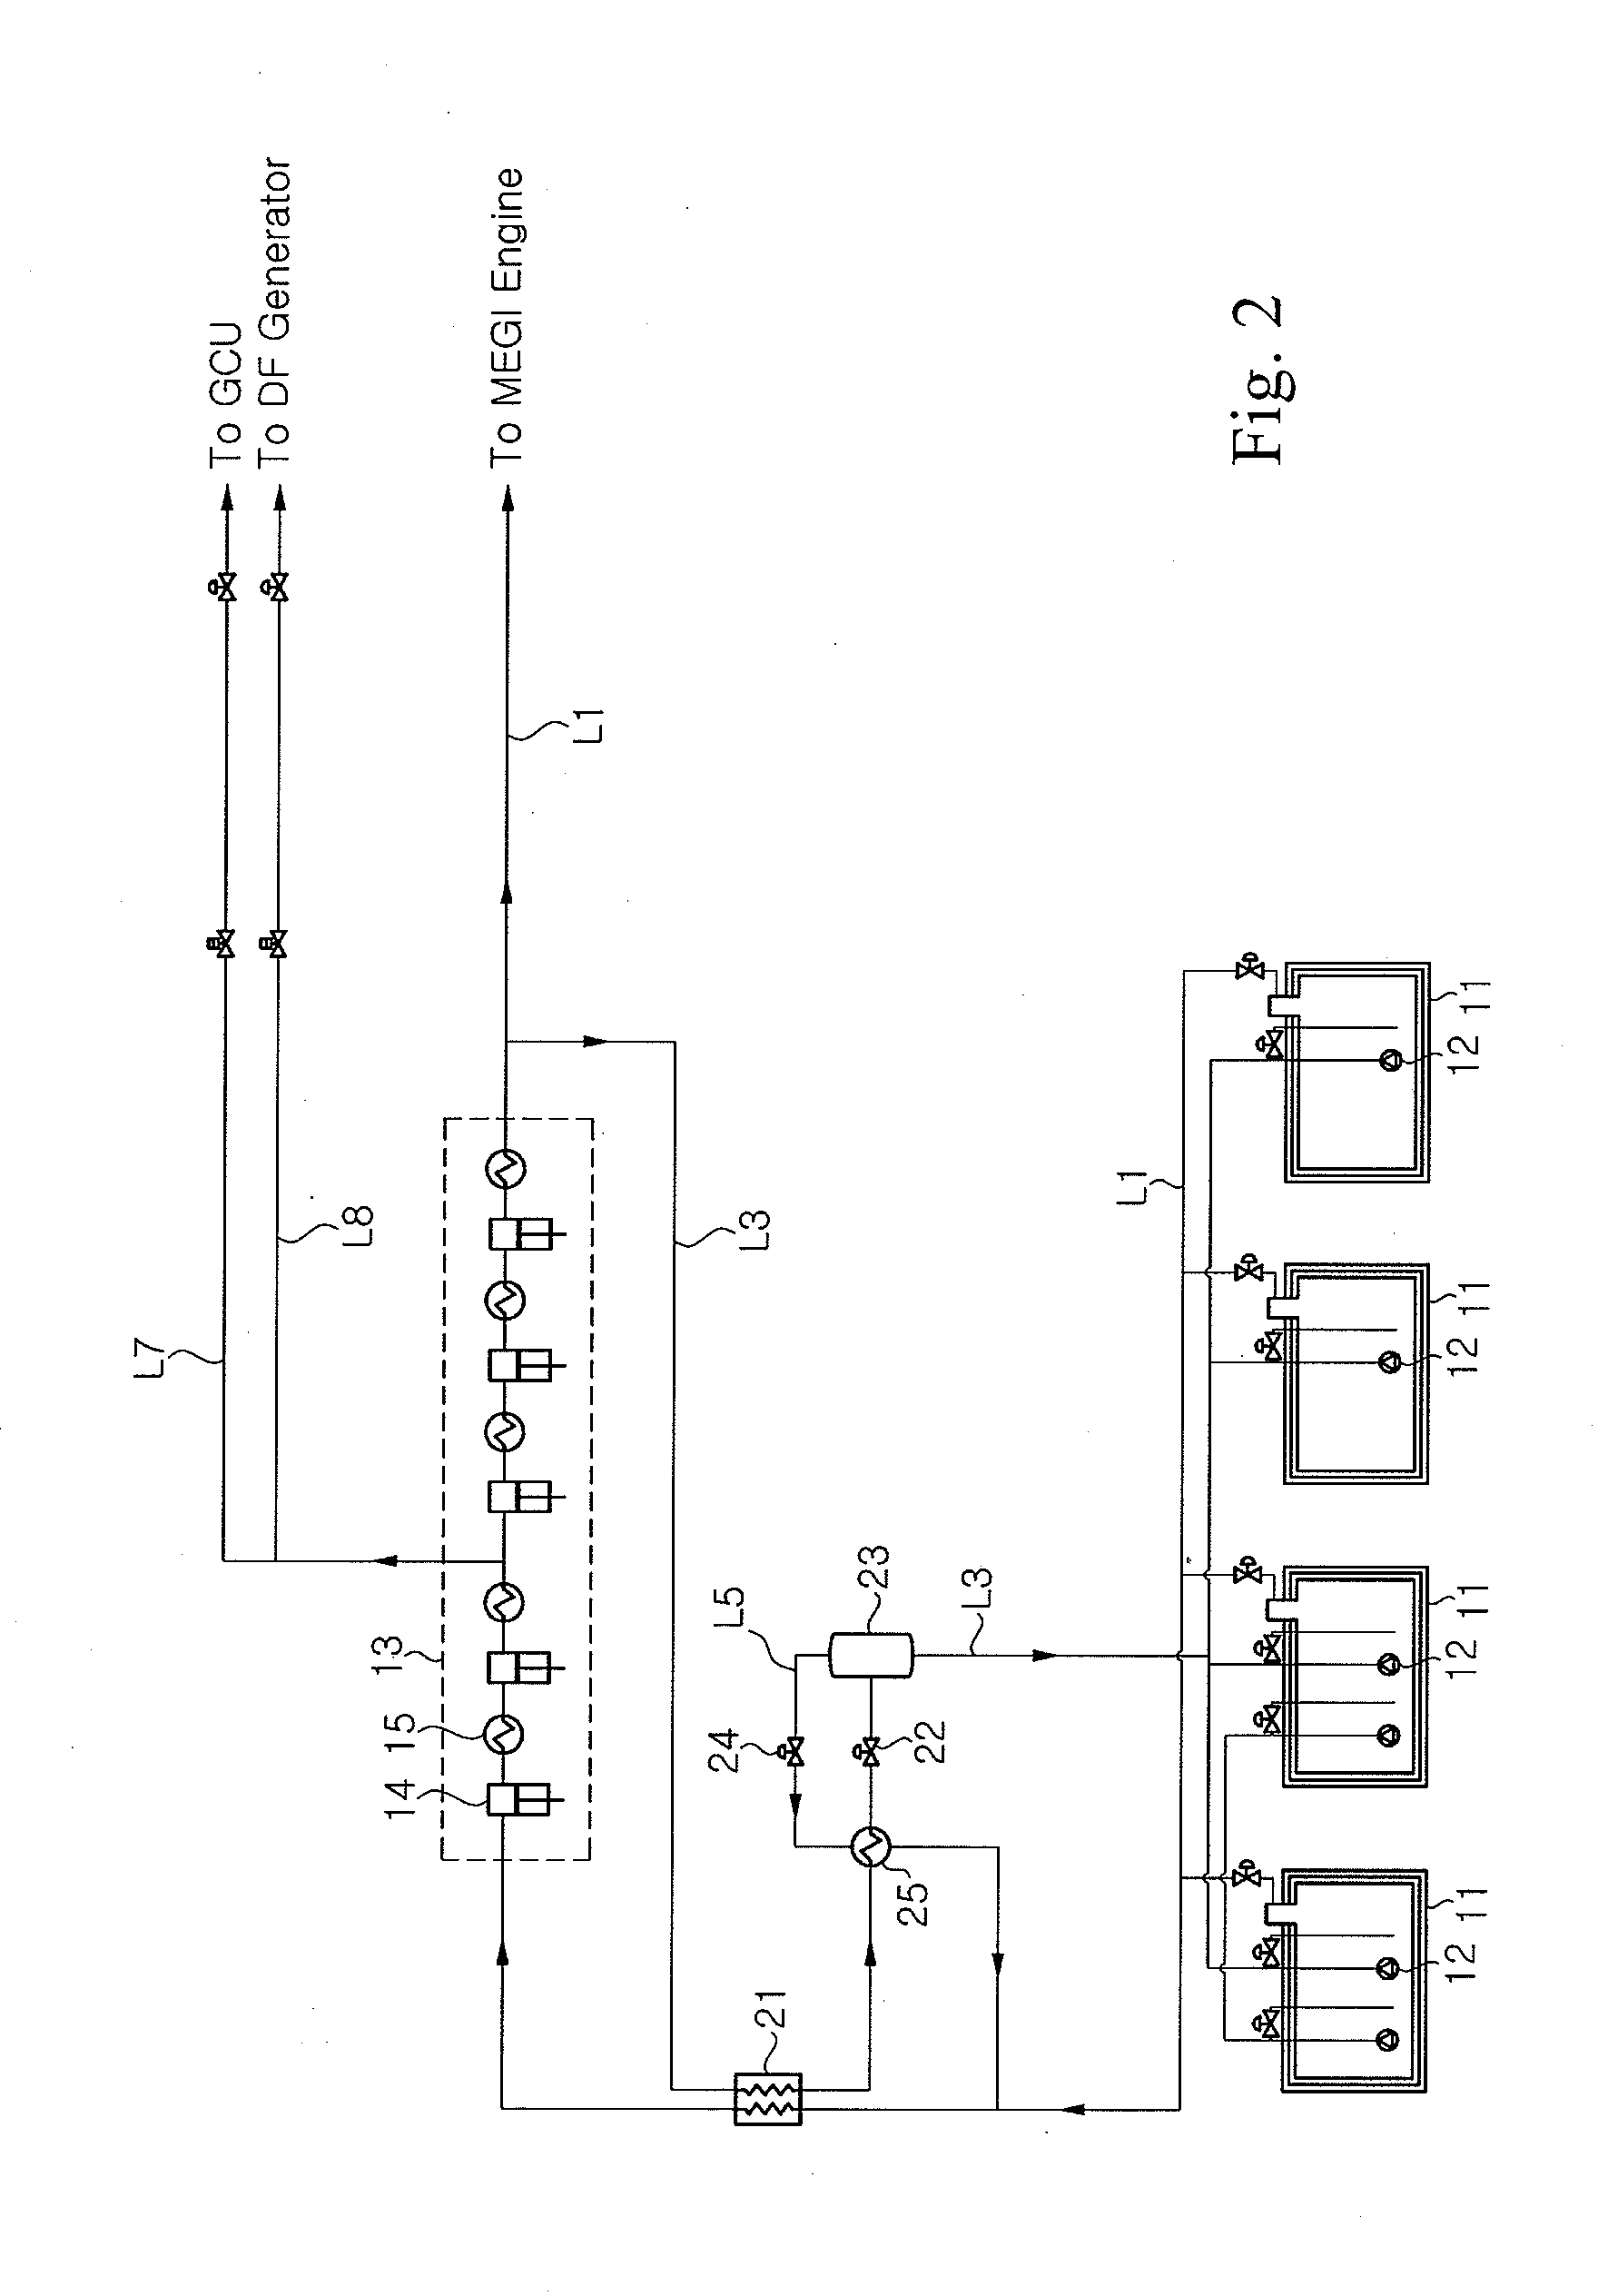 Liquefied gas treatment system for vessel